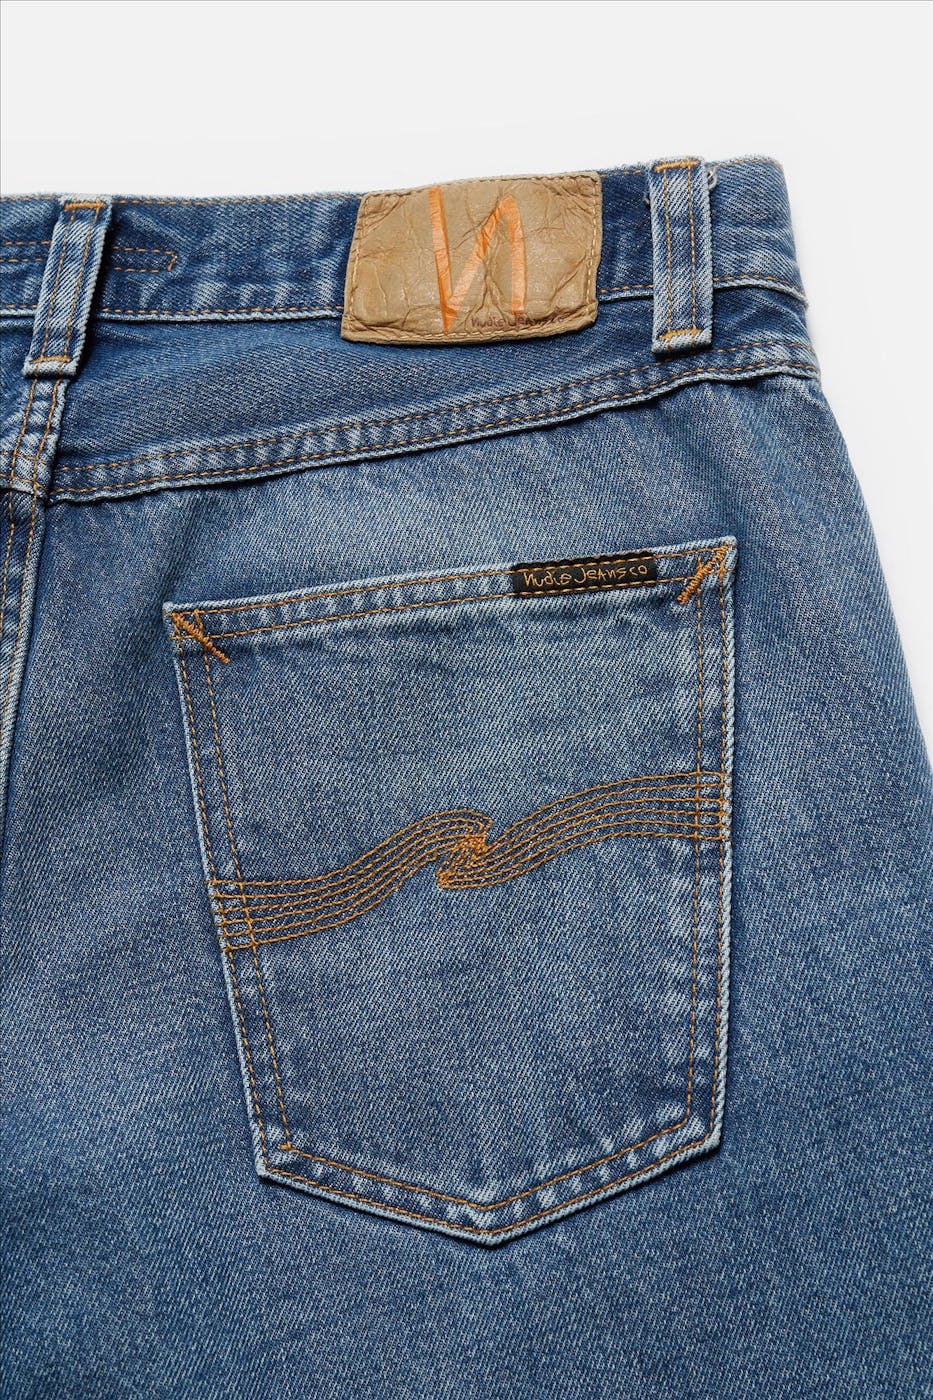 Nudie Jeans Co. - Blauwe Gritty Jackson jeans